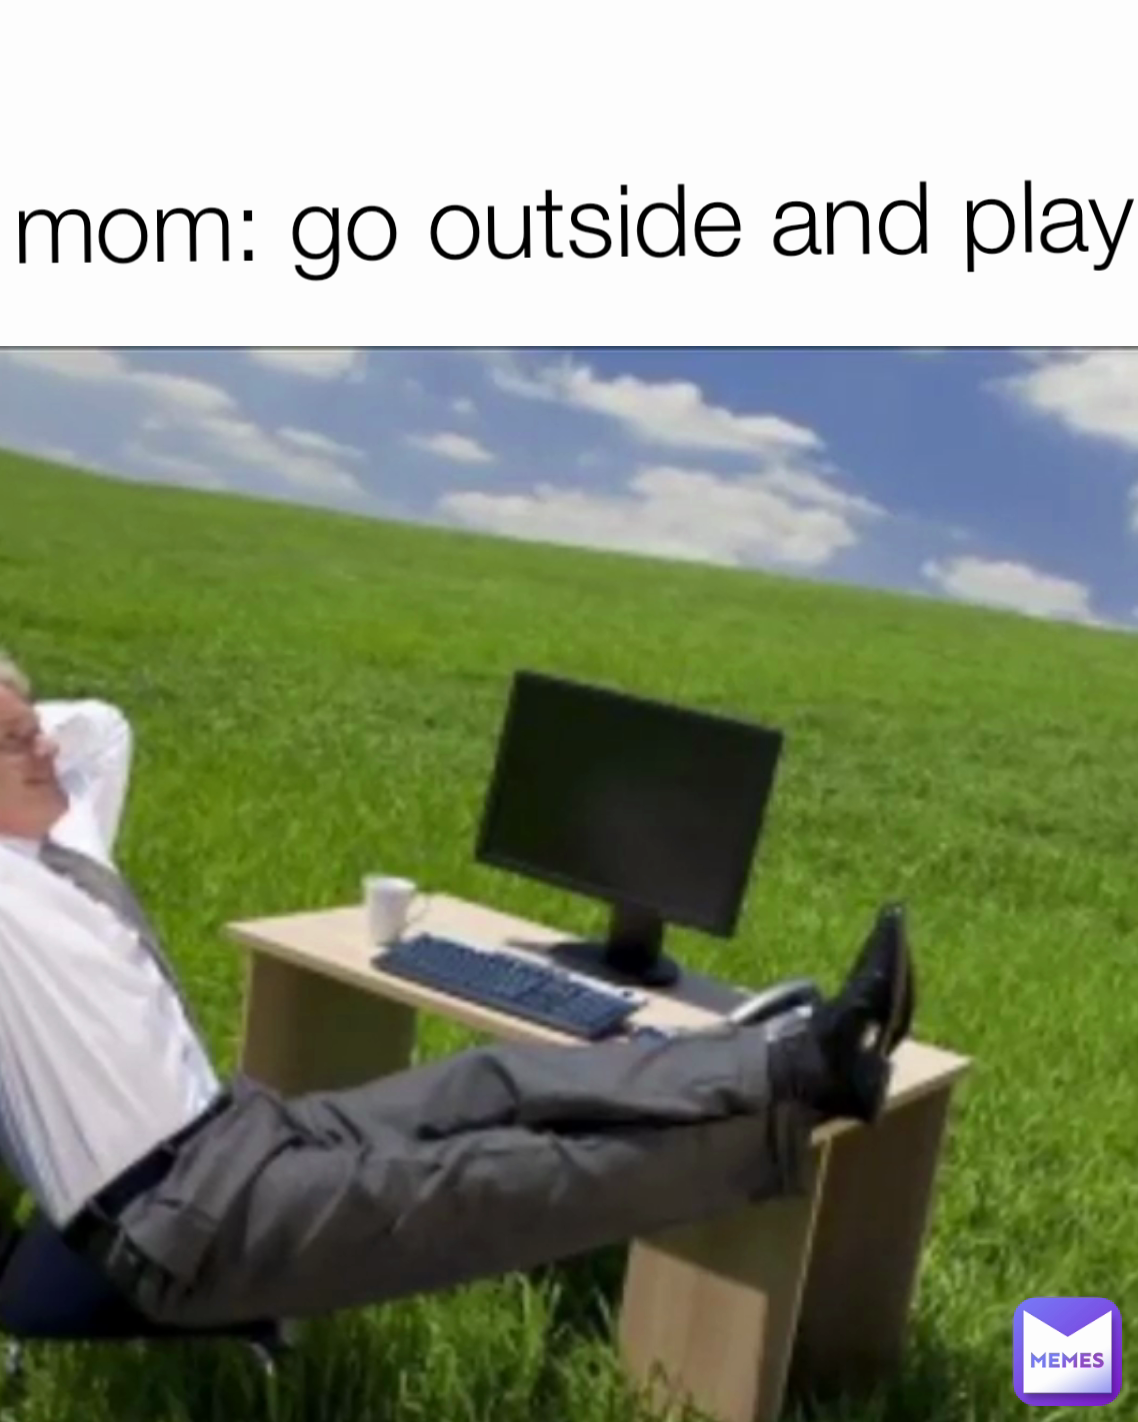 mom: go outside and play